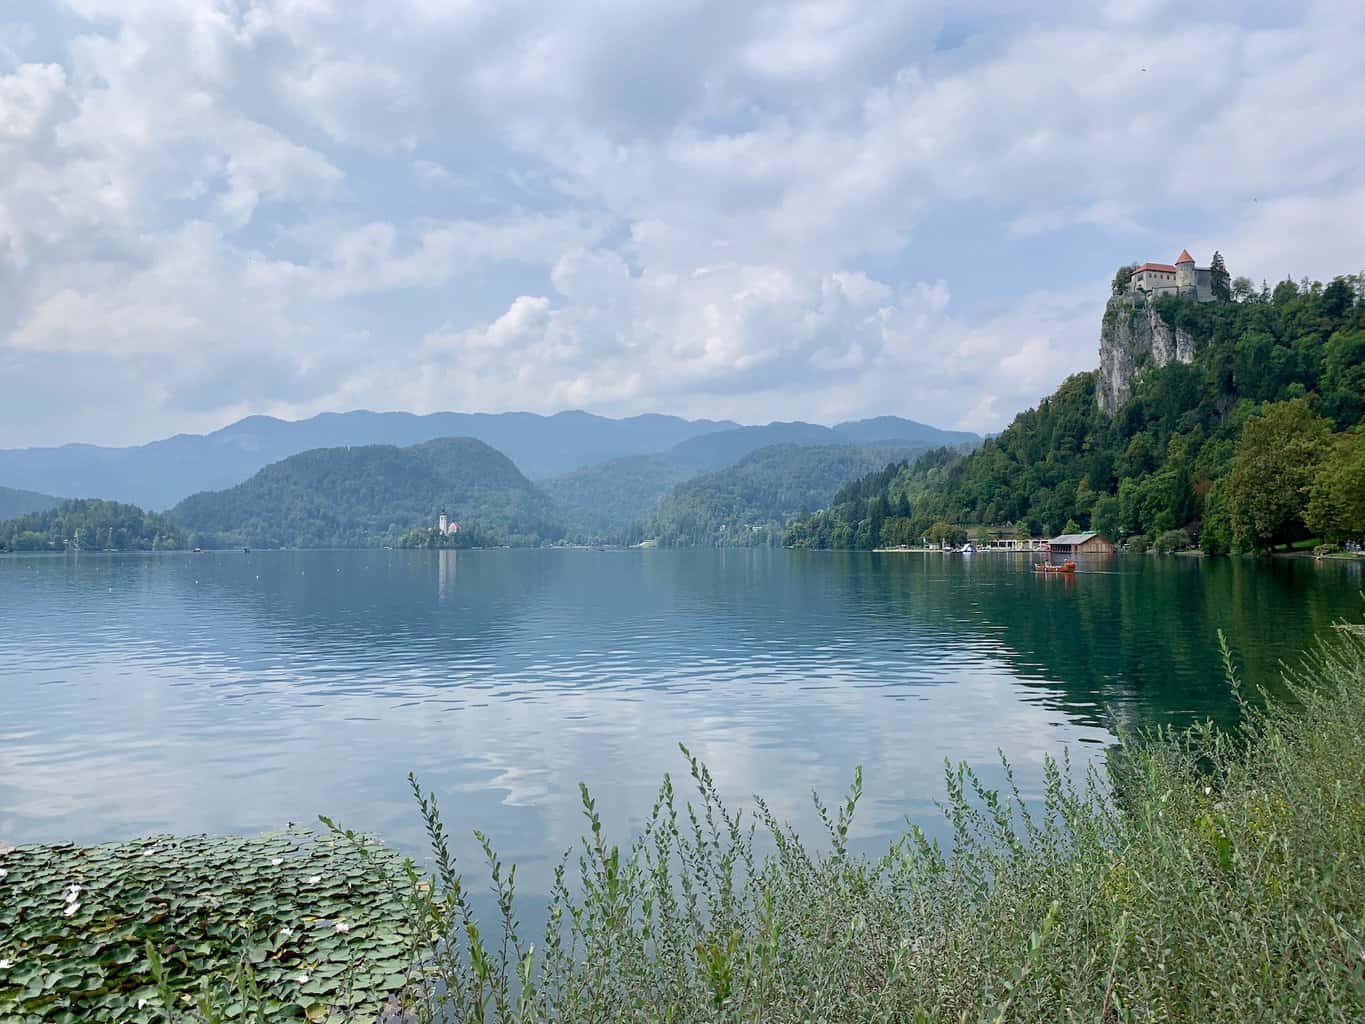 The Perfect Summer Day at Lake Bled - Forget Someday